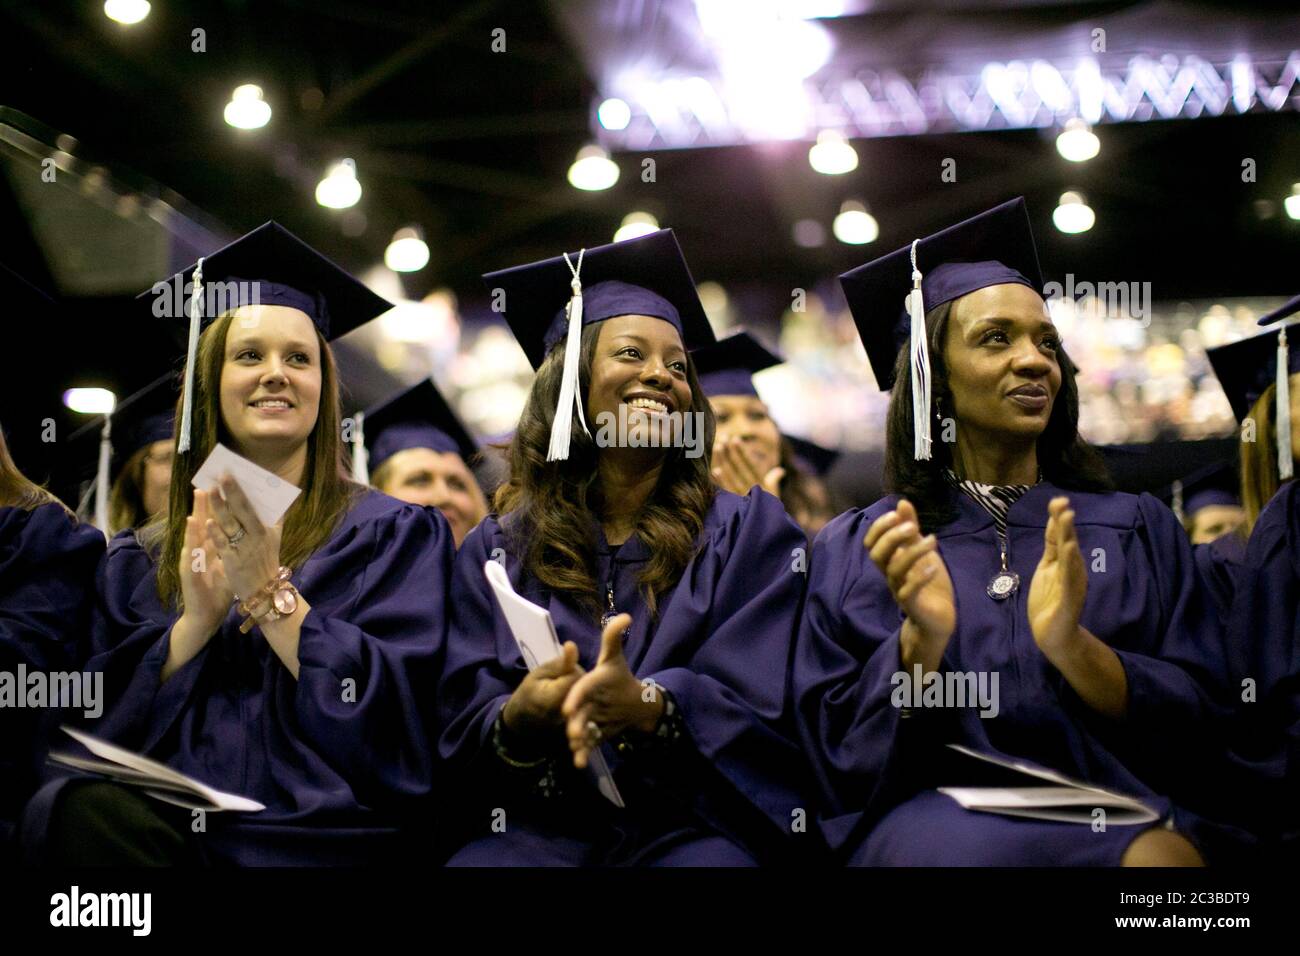 Houston , Texas USA, November 8, 2014: Students wearing traditional graduation regalia participate in Western Governors University commencement ceremony. WGU, a national online university that  offers competency-based degree programs, serves more than 50,000 students in 50 states. ©Marjorie Kamys Cotera/Daemmrich Photography Stock Photo